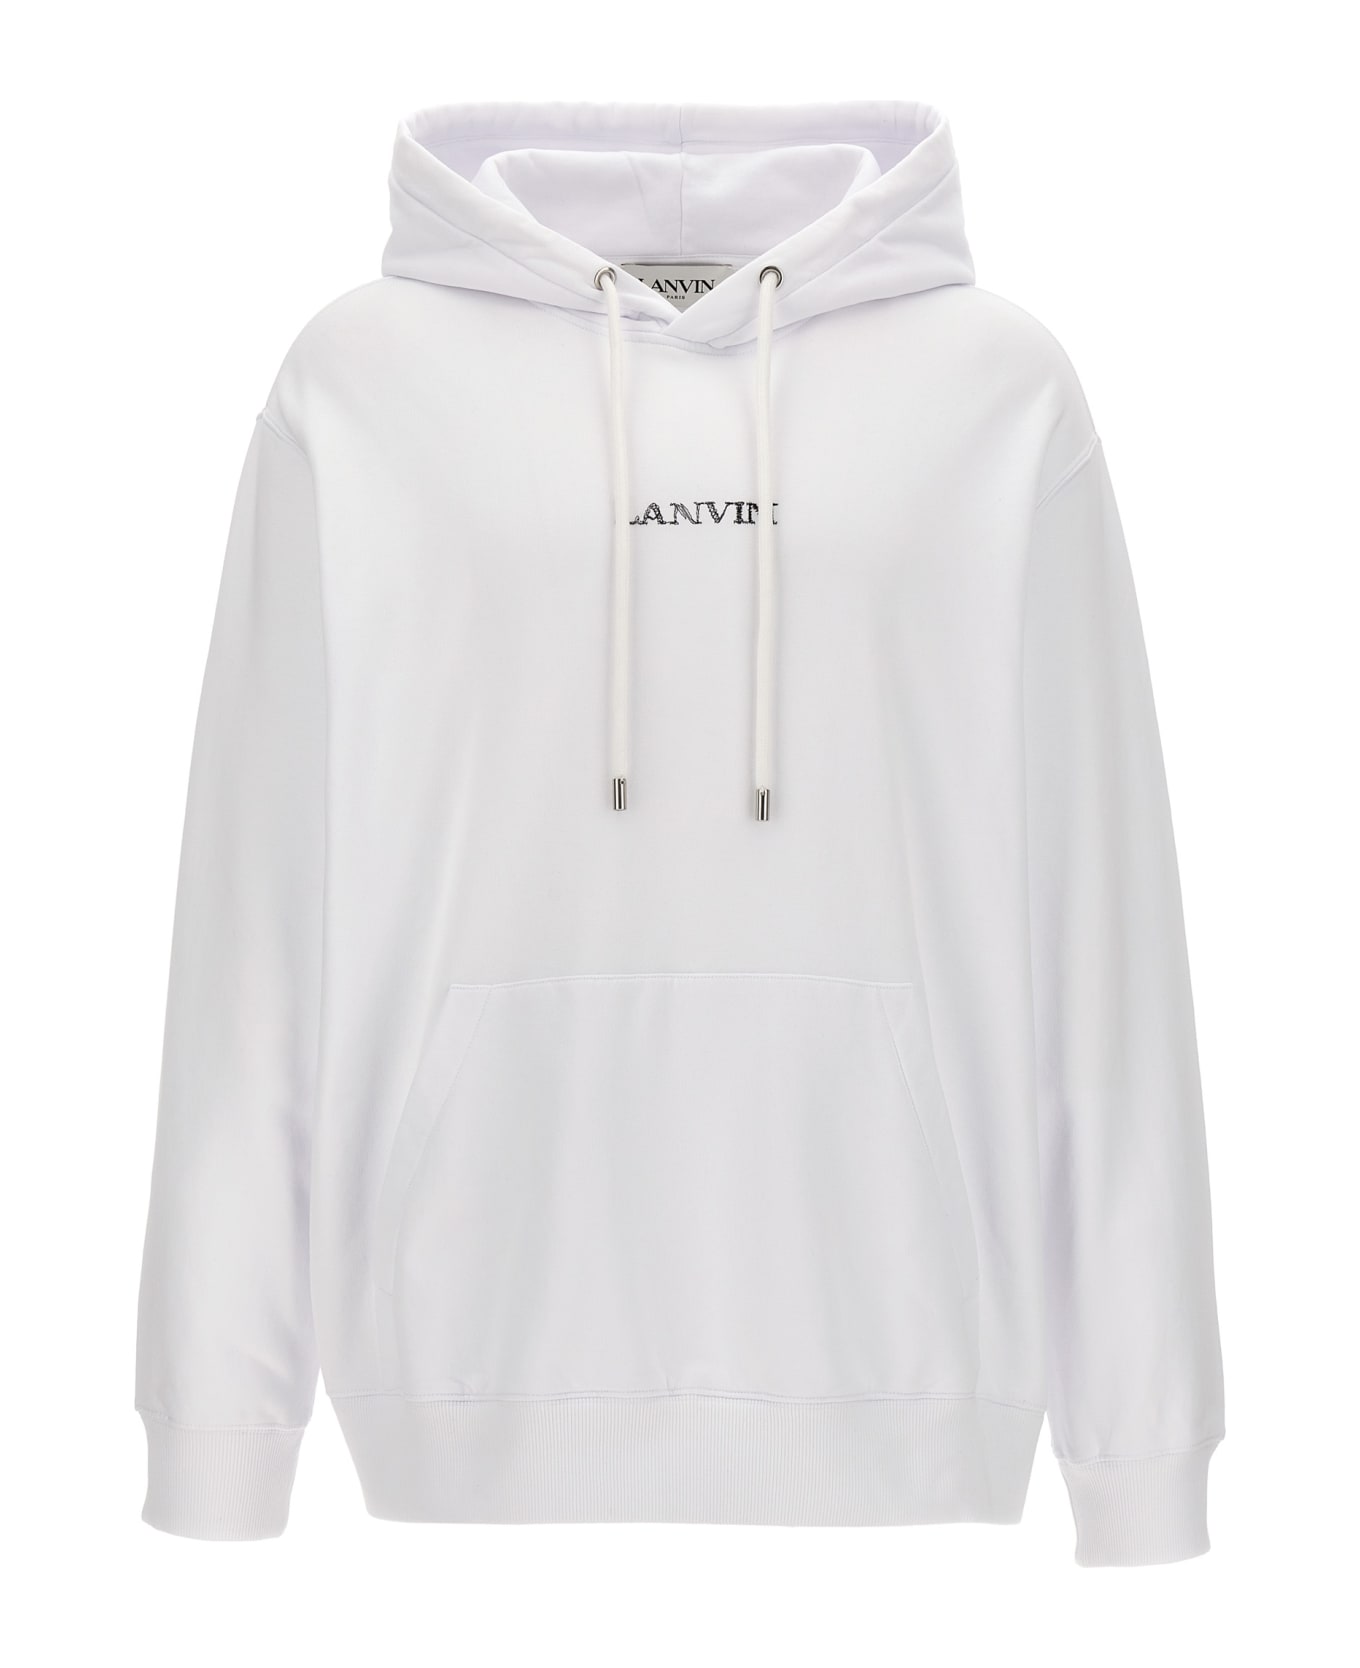 Lanvin Logo Embroidery Hoodie - White